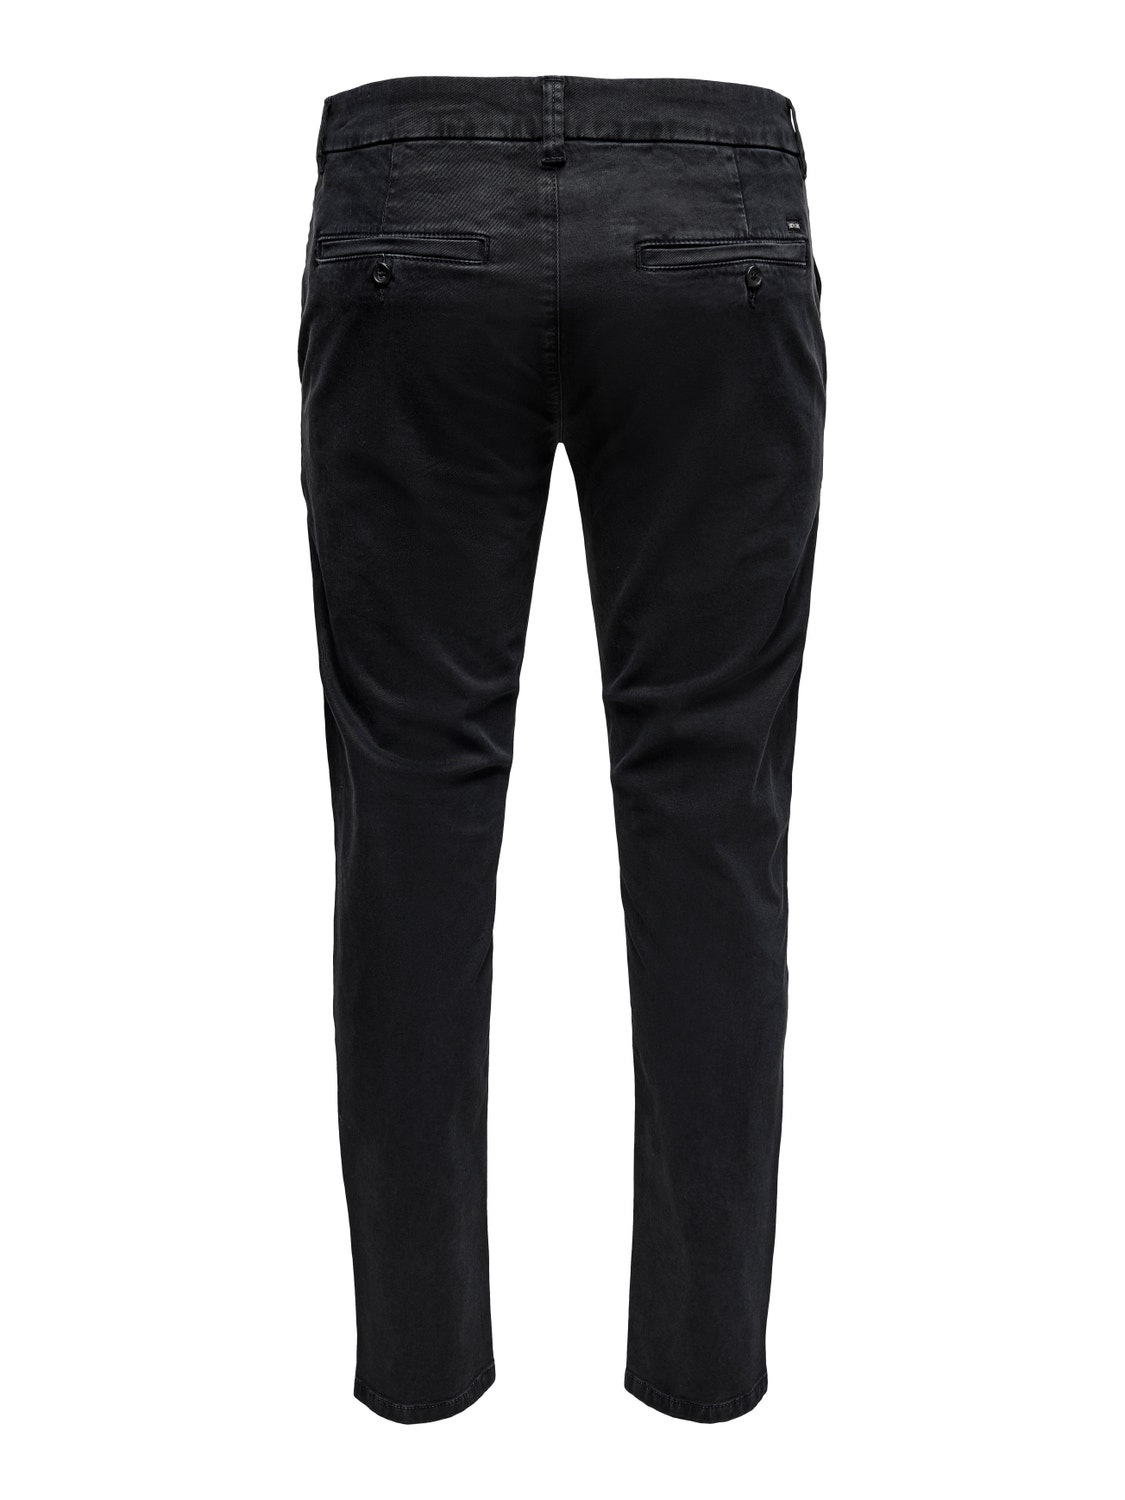 ONLY & SONS Slim fit Mid waist Chino's -Black - 22019934